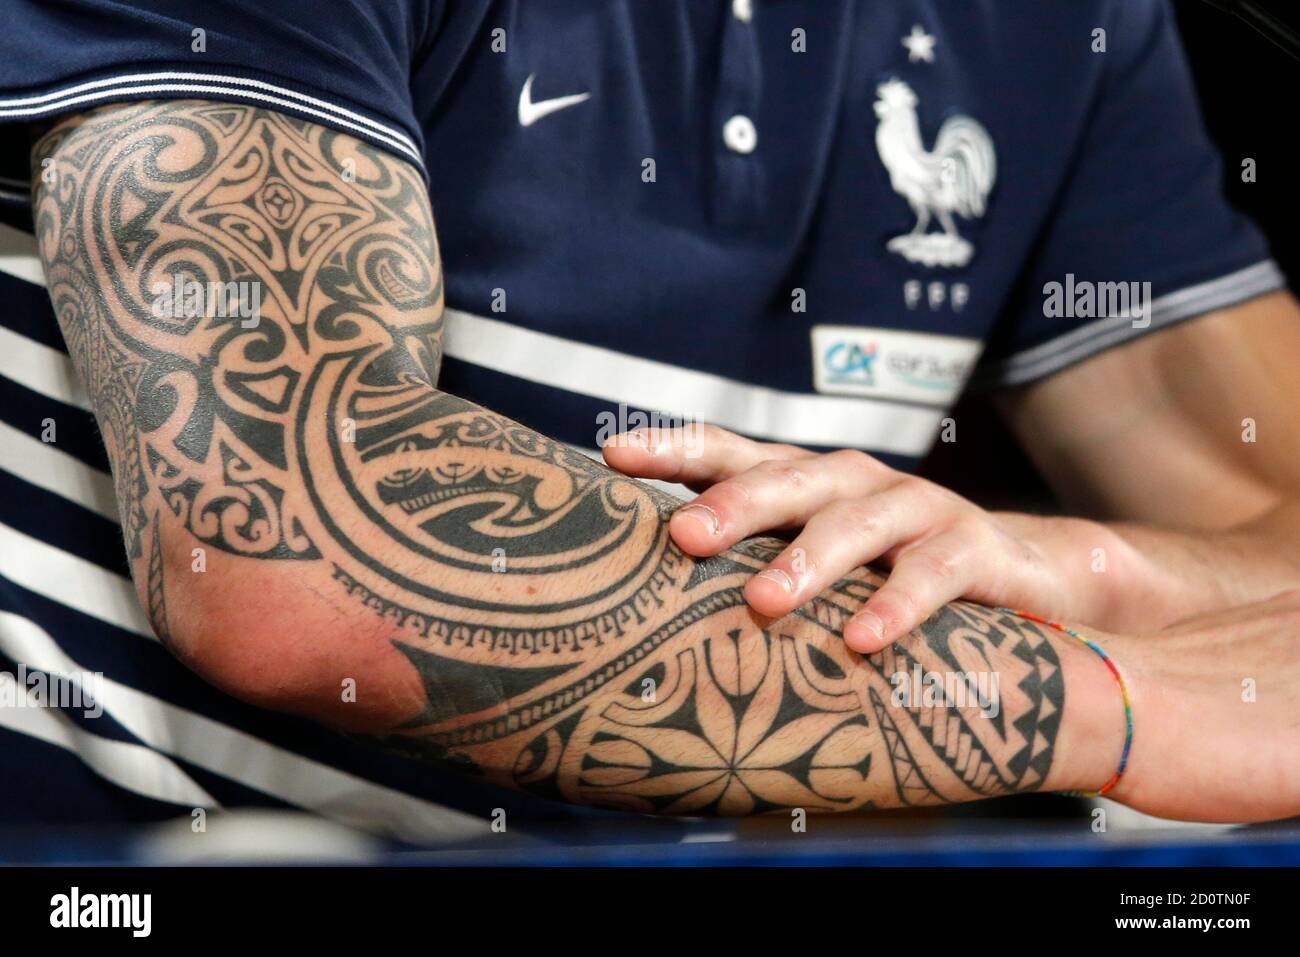 Page 4 - Soccer Tattoos High Resolution Stock Photography and Images - Alamy